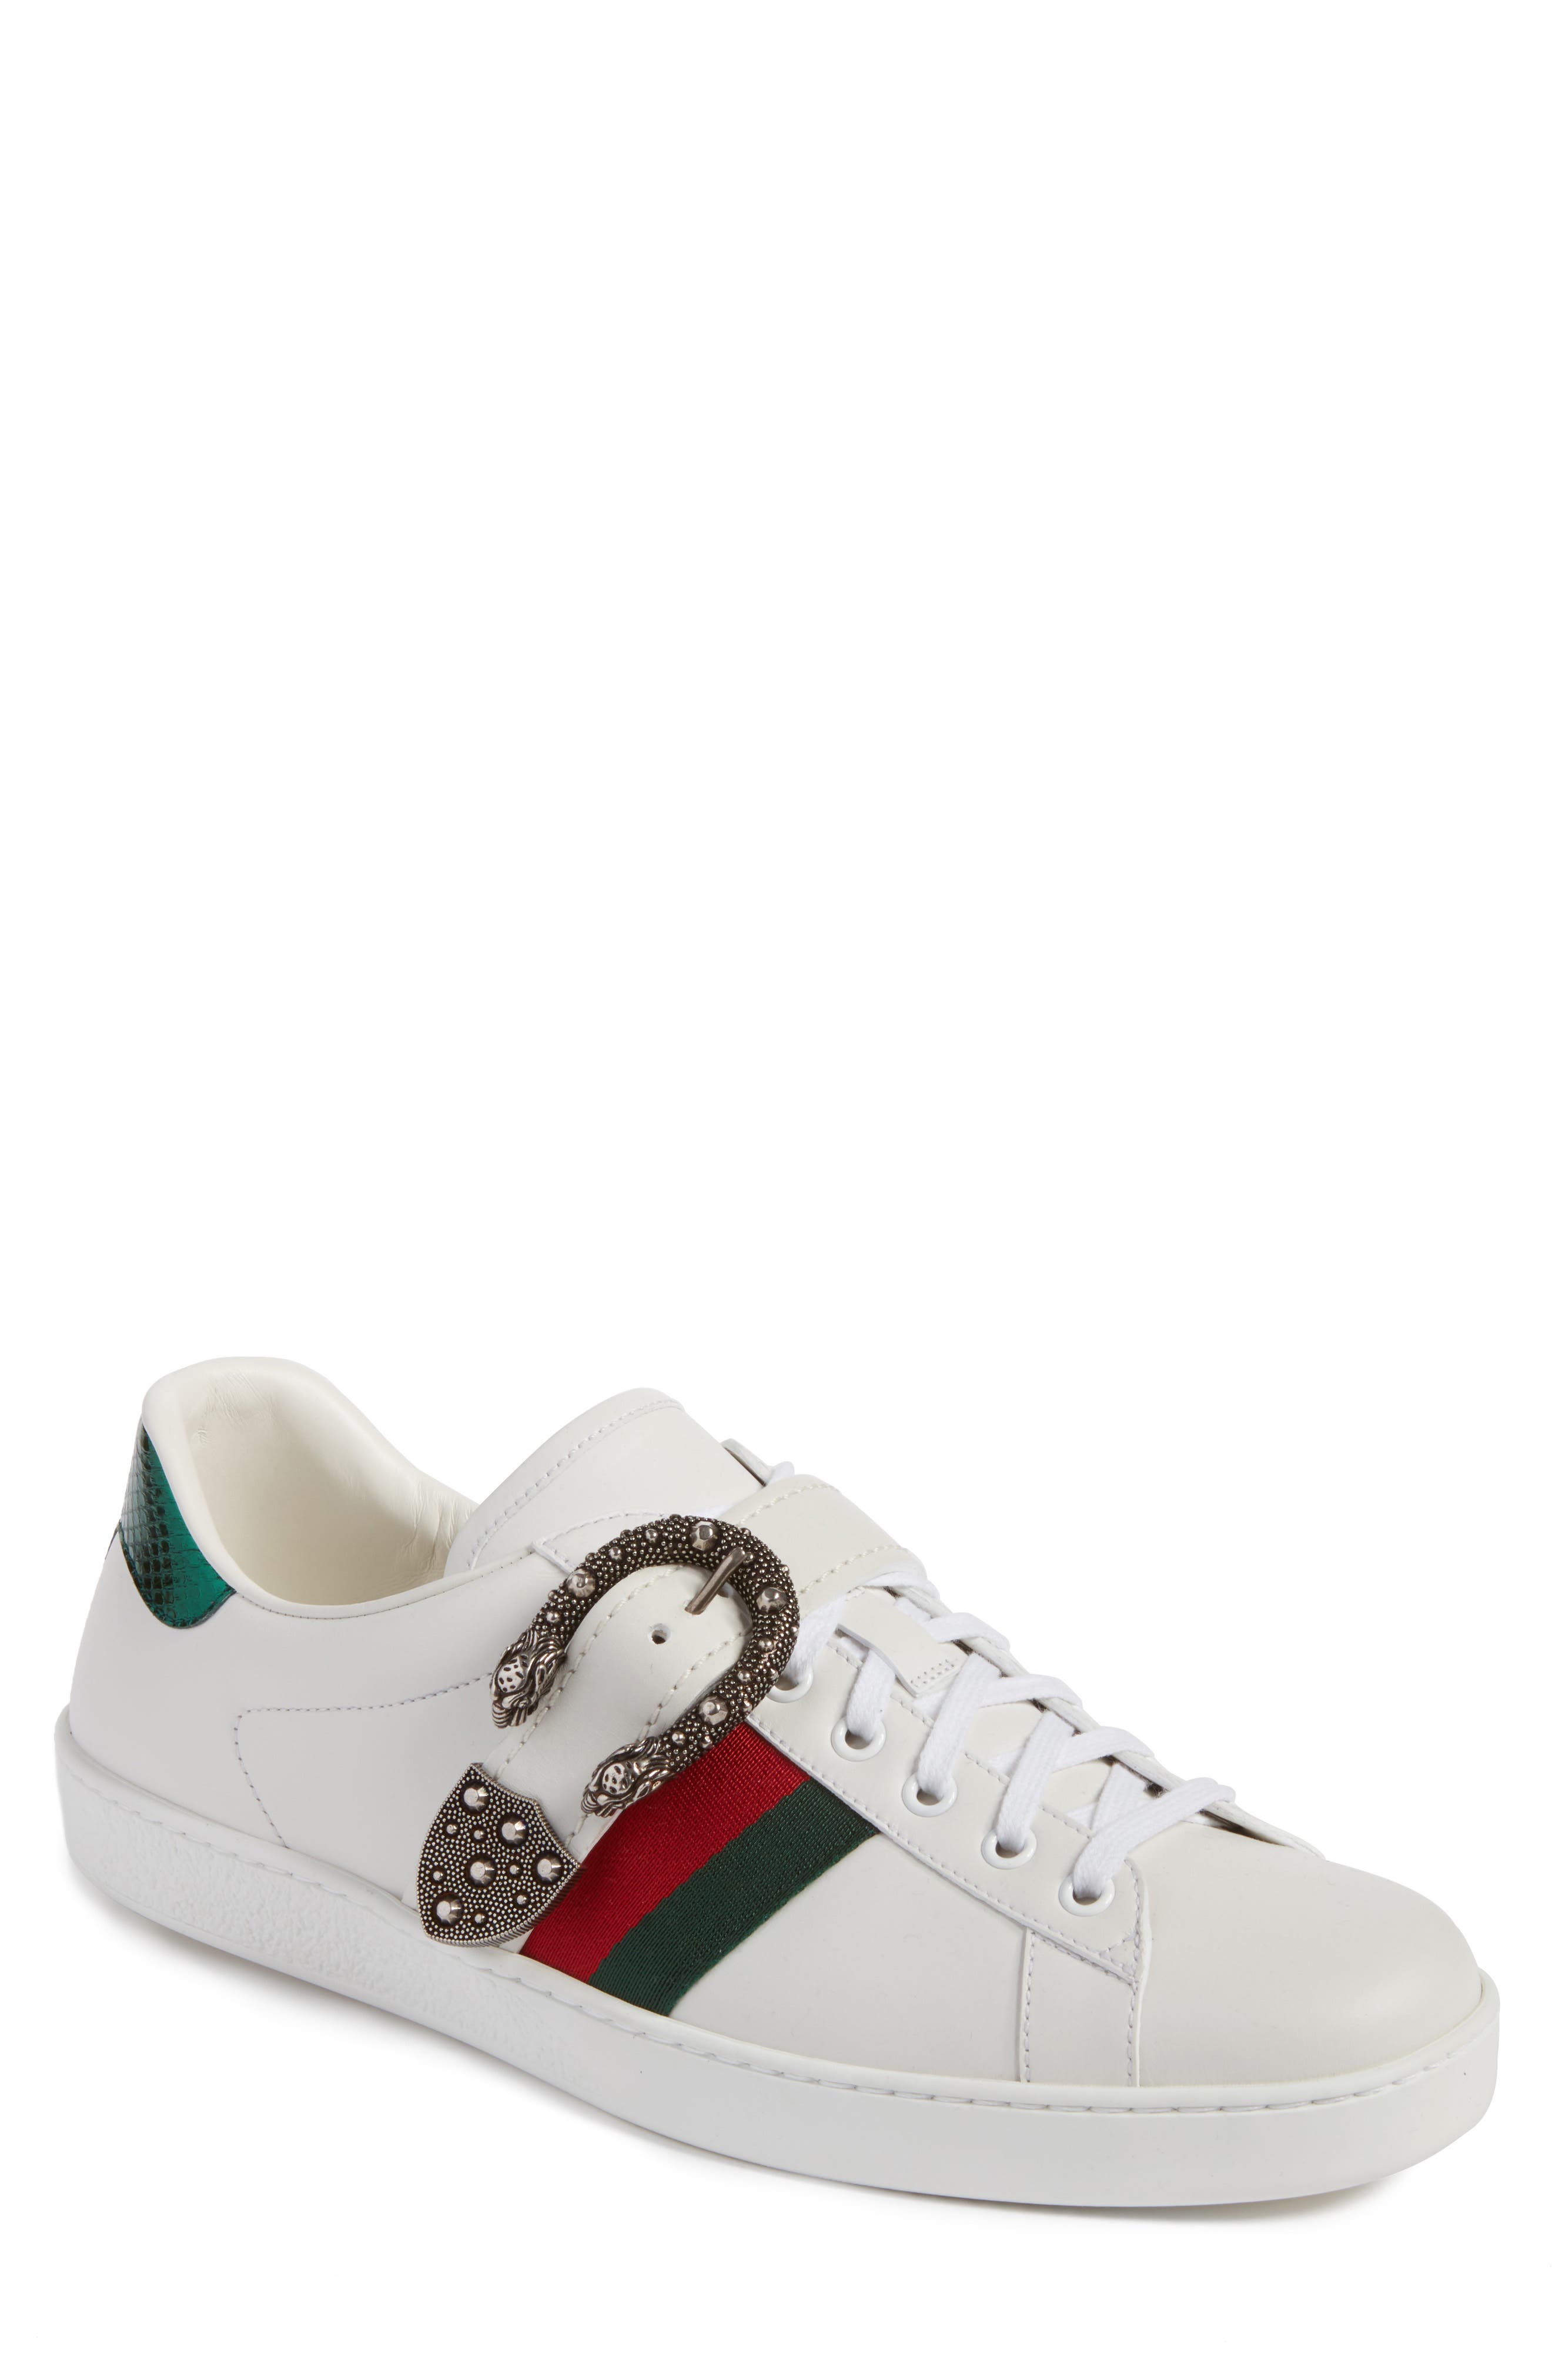 ace sneaker with dionysus buckle